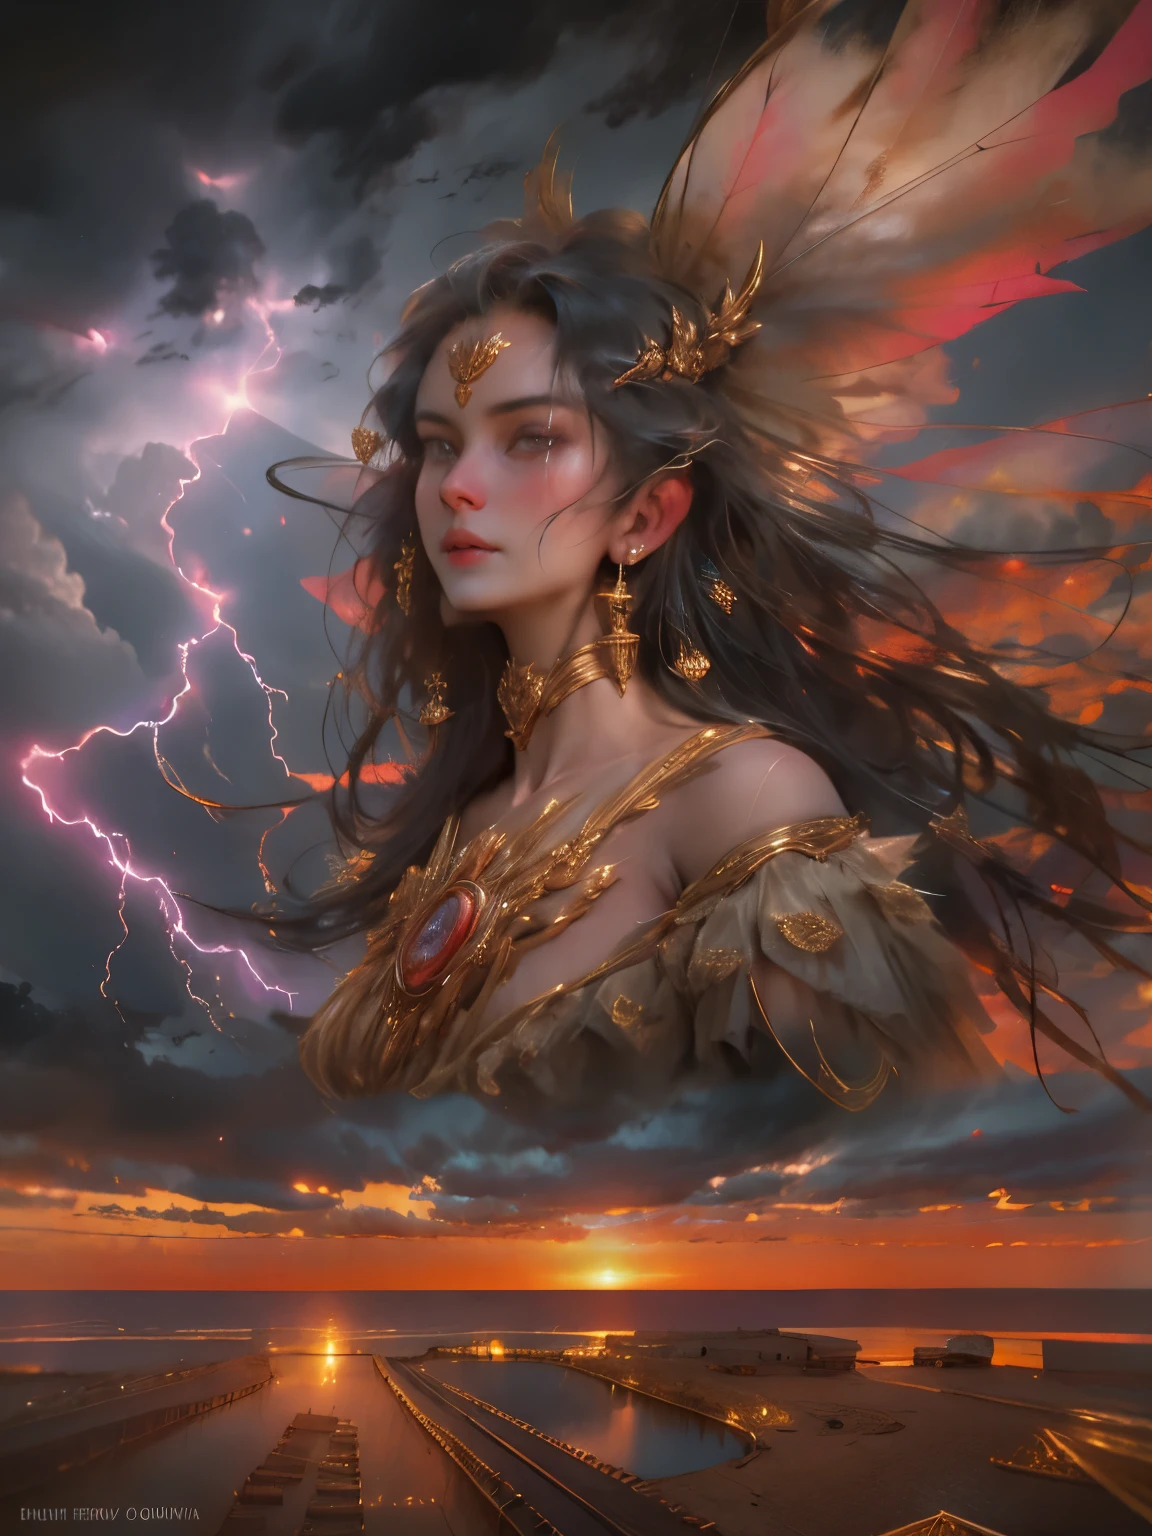 BEAUTIFUL WOMAN in the mountain, sunset sky, red sunset clouds, sunset, long hair in the wind, Eagle feathers, eagle queen, goddess dressed in Eagle feathers, fancy, overexposure, perfects eyes, metallic colors, SurrealArt , whole body, barefoot, mountain horizon view, lake in the distance, lady in the center of the scene, huge full moon in front of the sun, ((clothing transparent)), ((dark storm clouds with lightning)), lightning strikes, garoa leve, fog in the distance, goddess on top of the mountain,